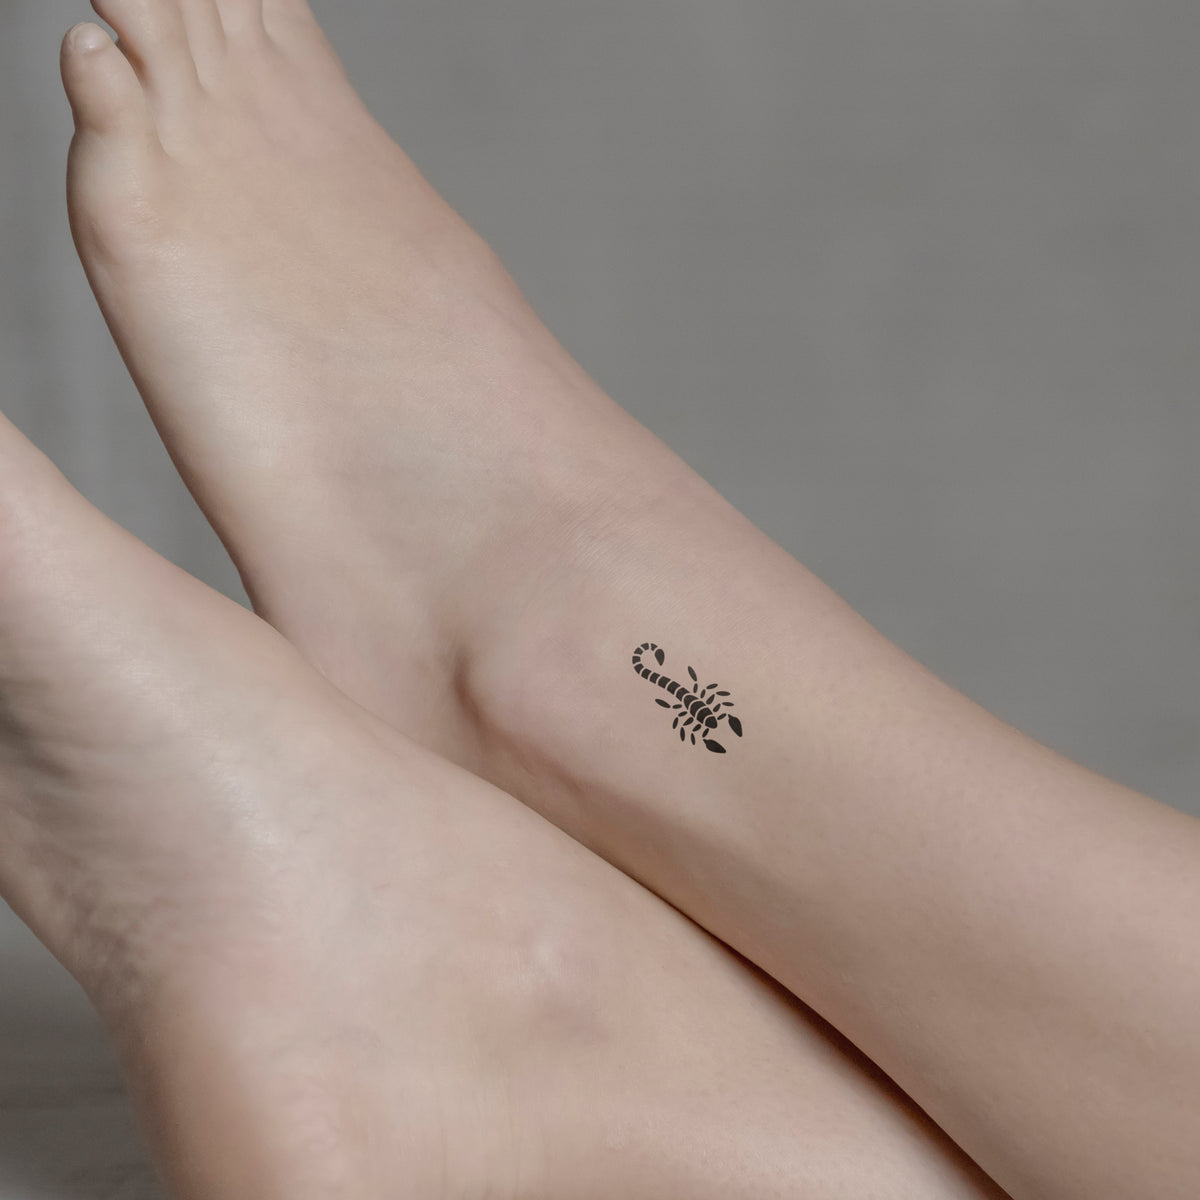 65 Scorpio Tattoos For The Mysteriously Attractive Sign | Horoscope tattoos,  Scorpio tattoo, Scorpio sign tattoos